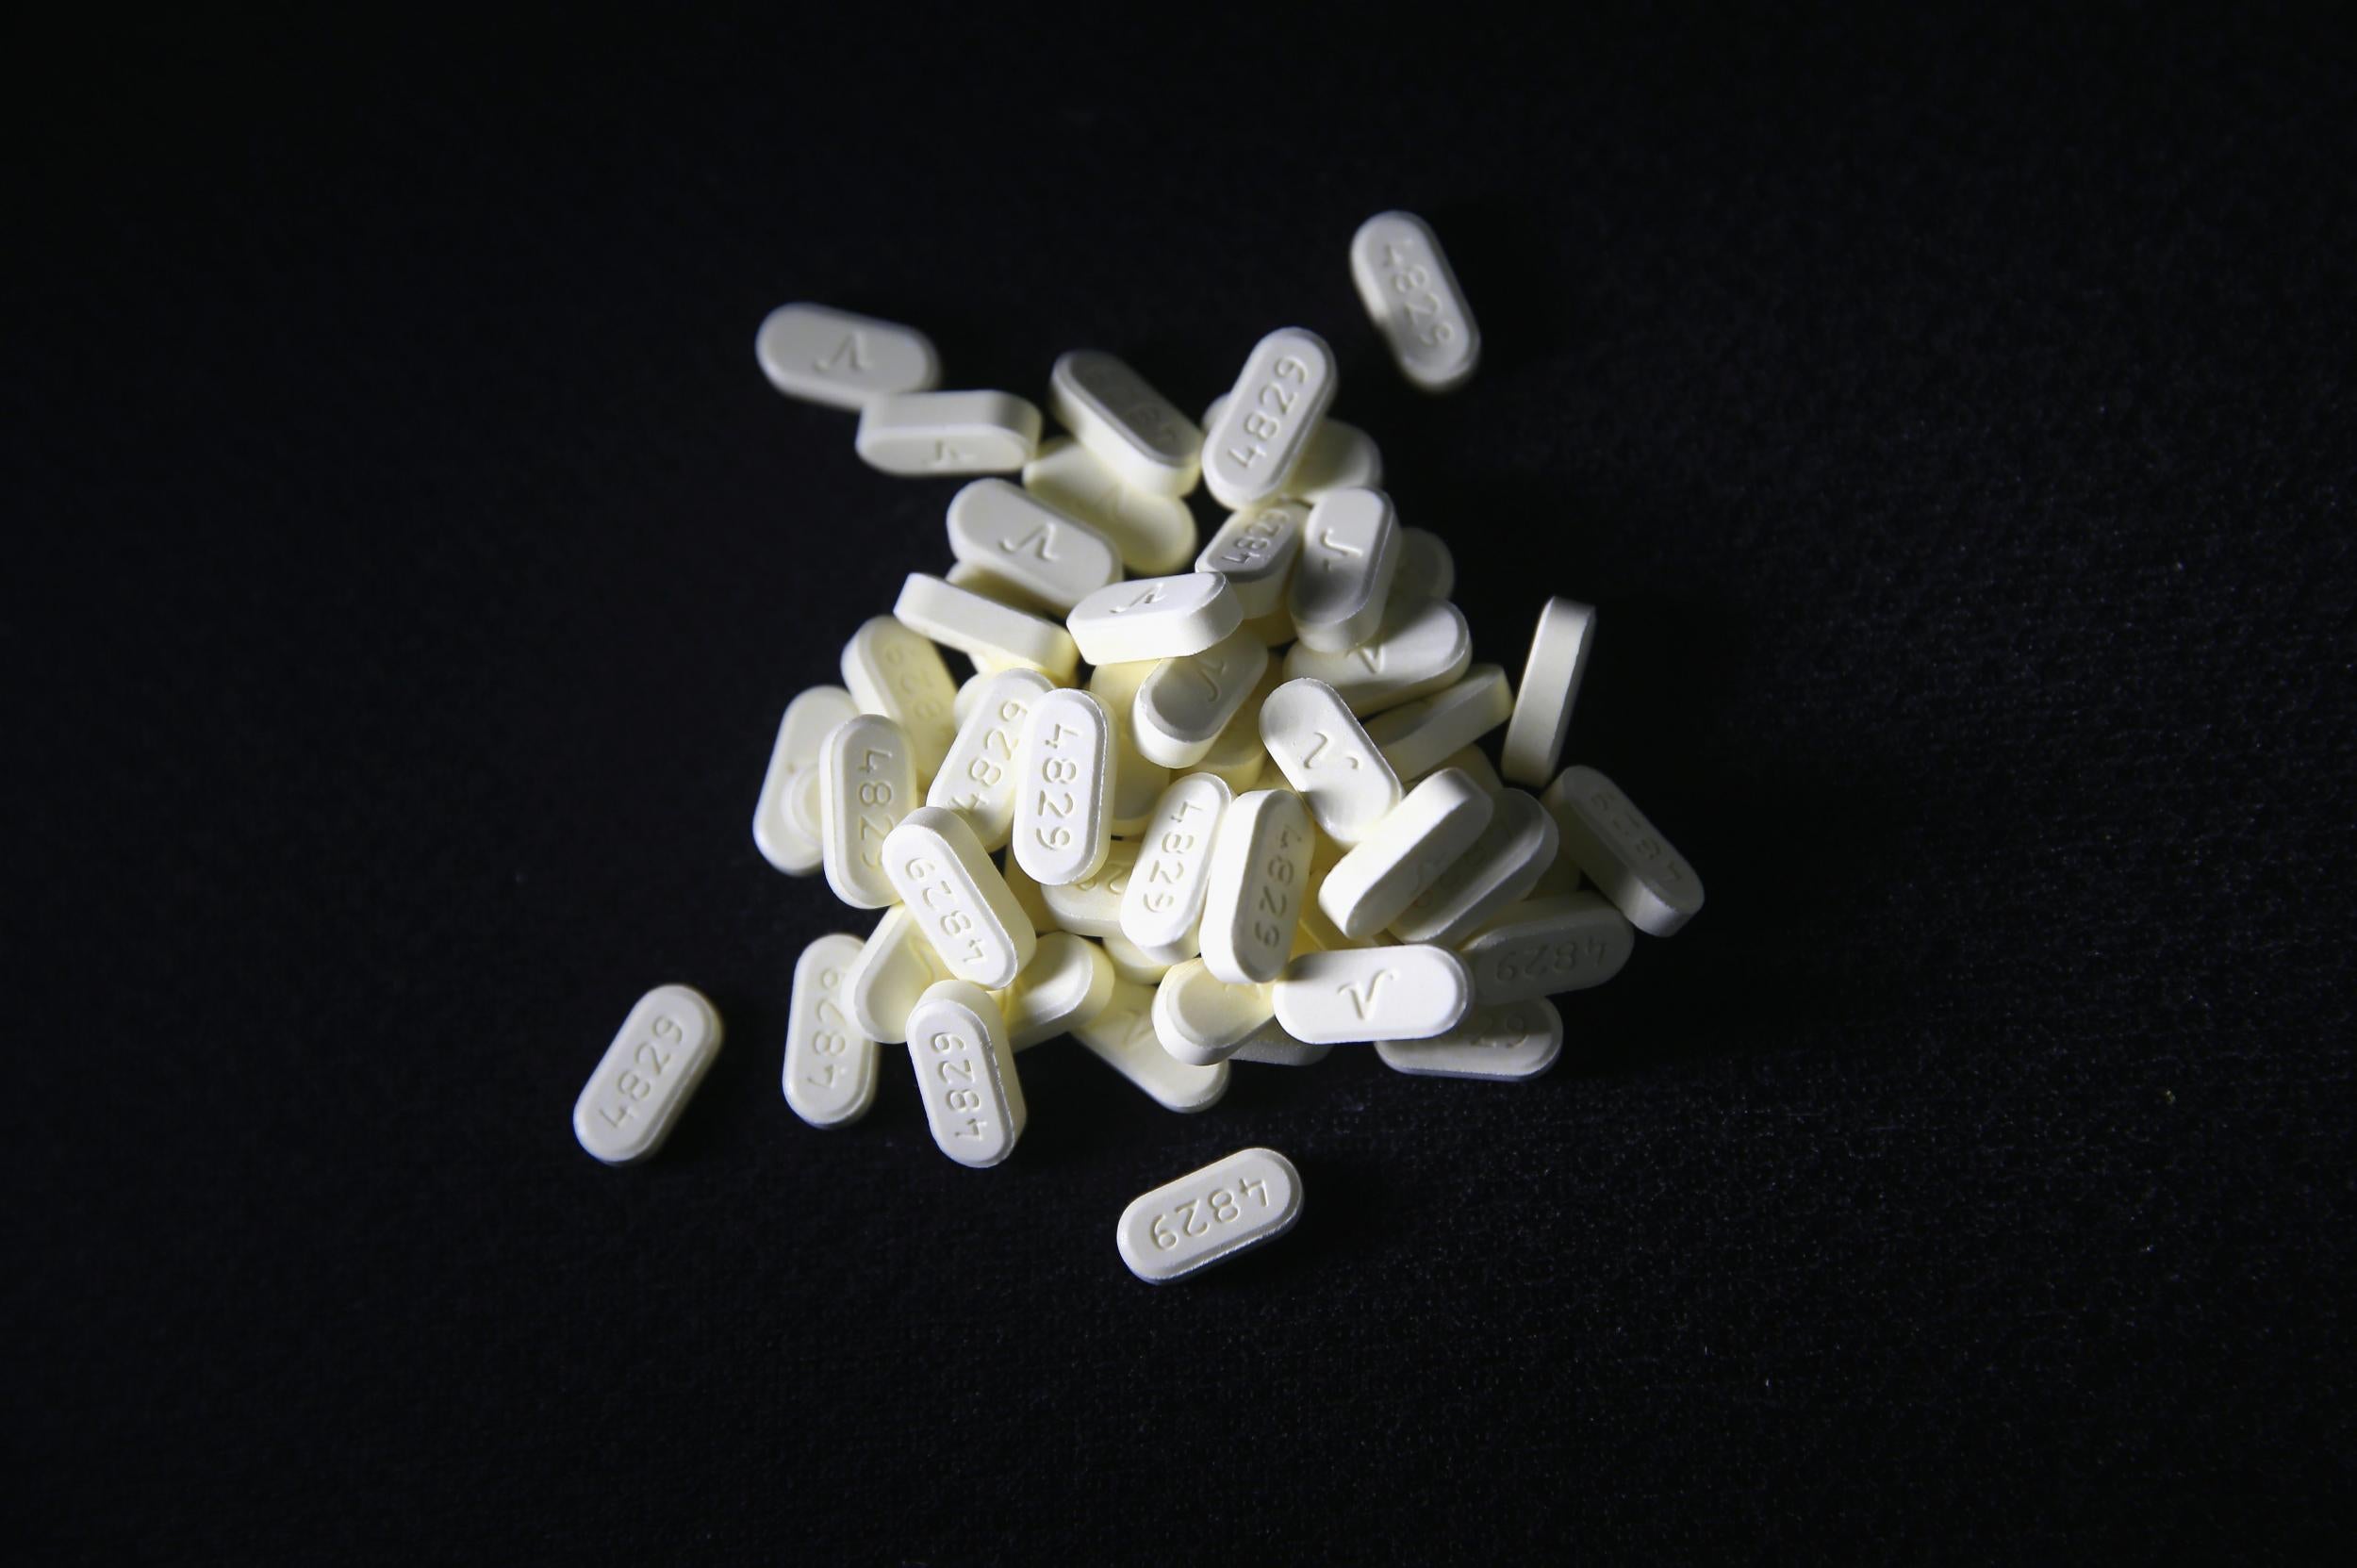 Child Opioid Overdoses Nearly Double In America The - 